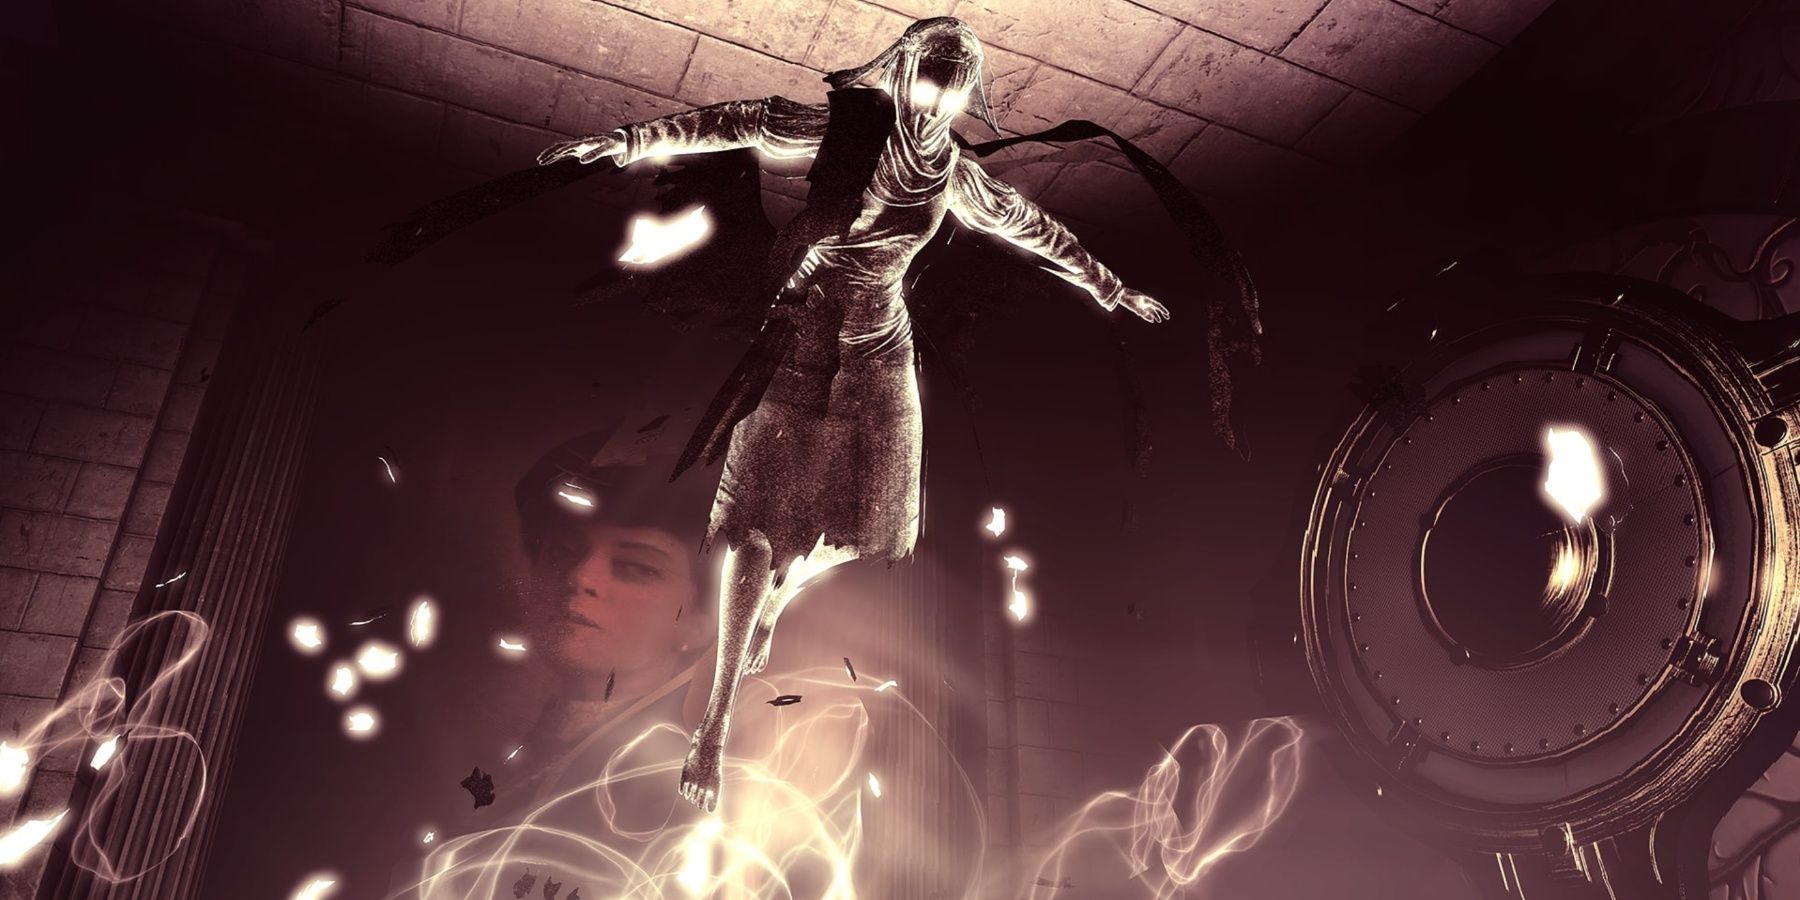 Lady Comstock as a ghost floating above the player in Bioshock Infinite